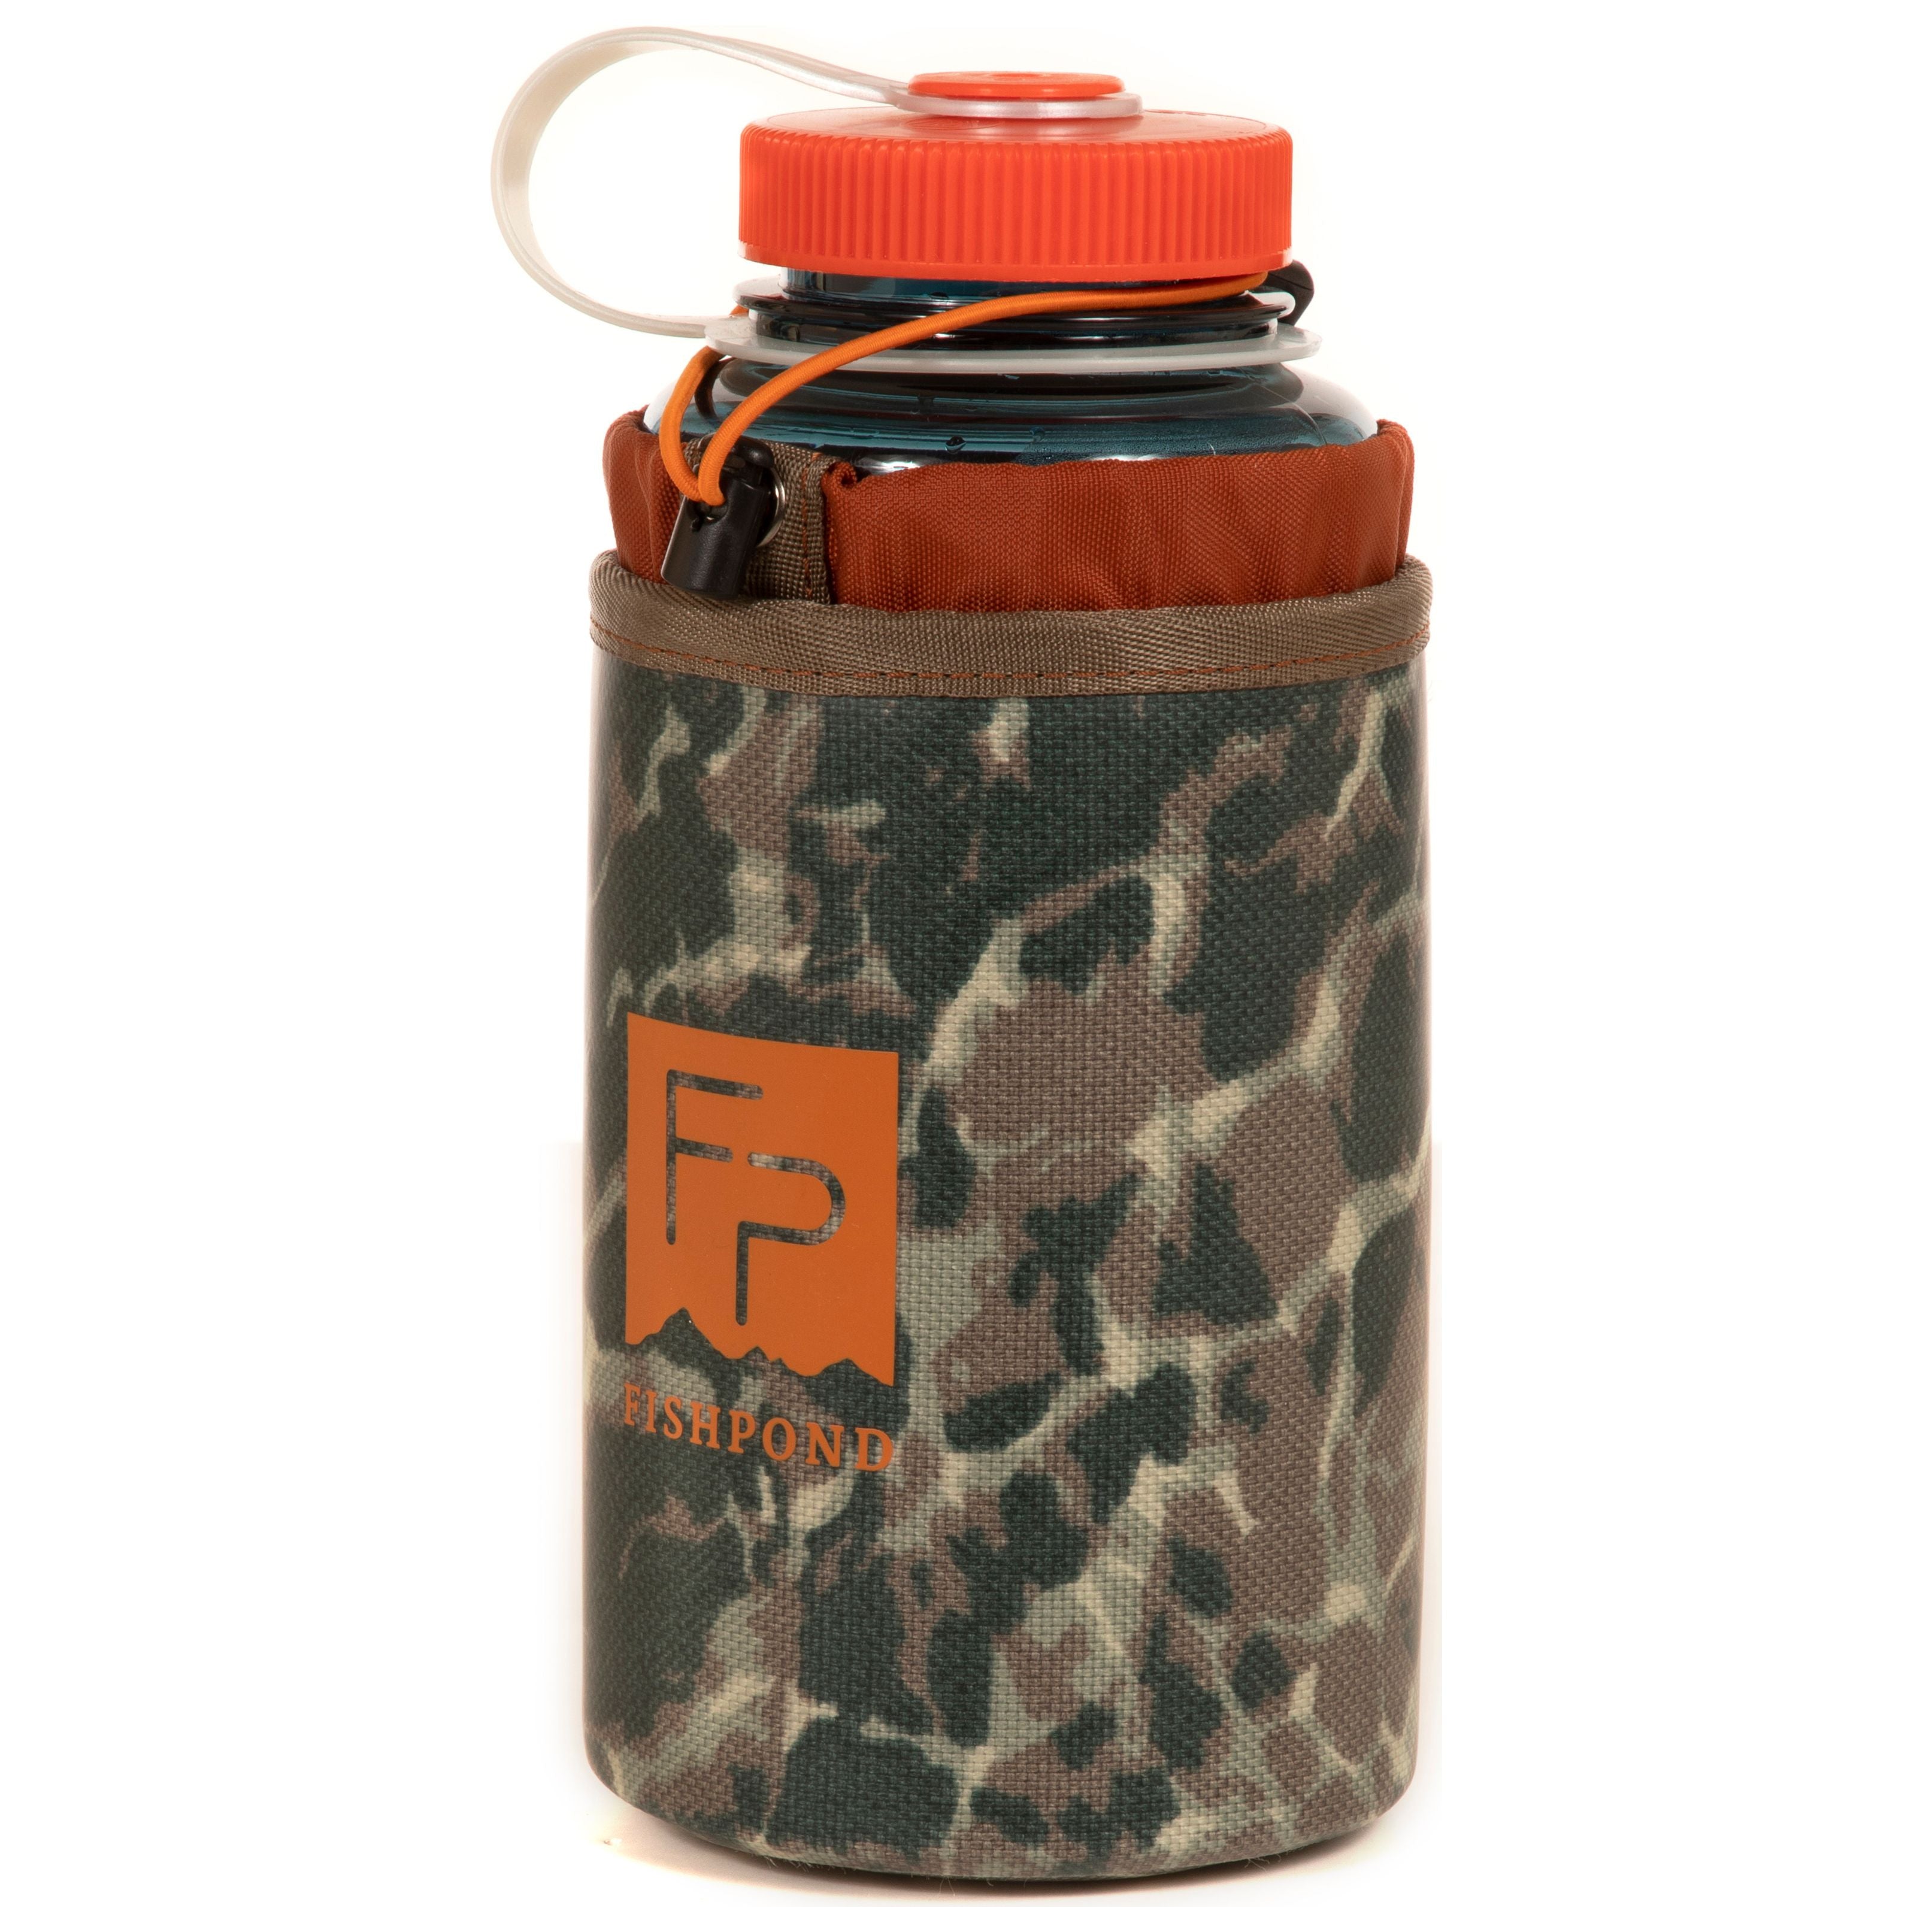 Fishpond Thunderhead Water Bottle Holder Eco Riverbed Camo Image 01